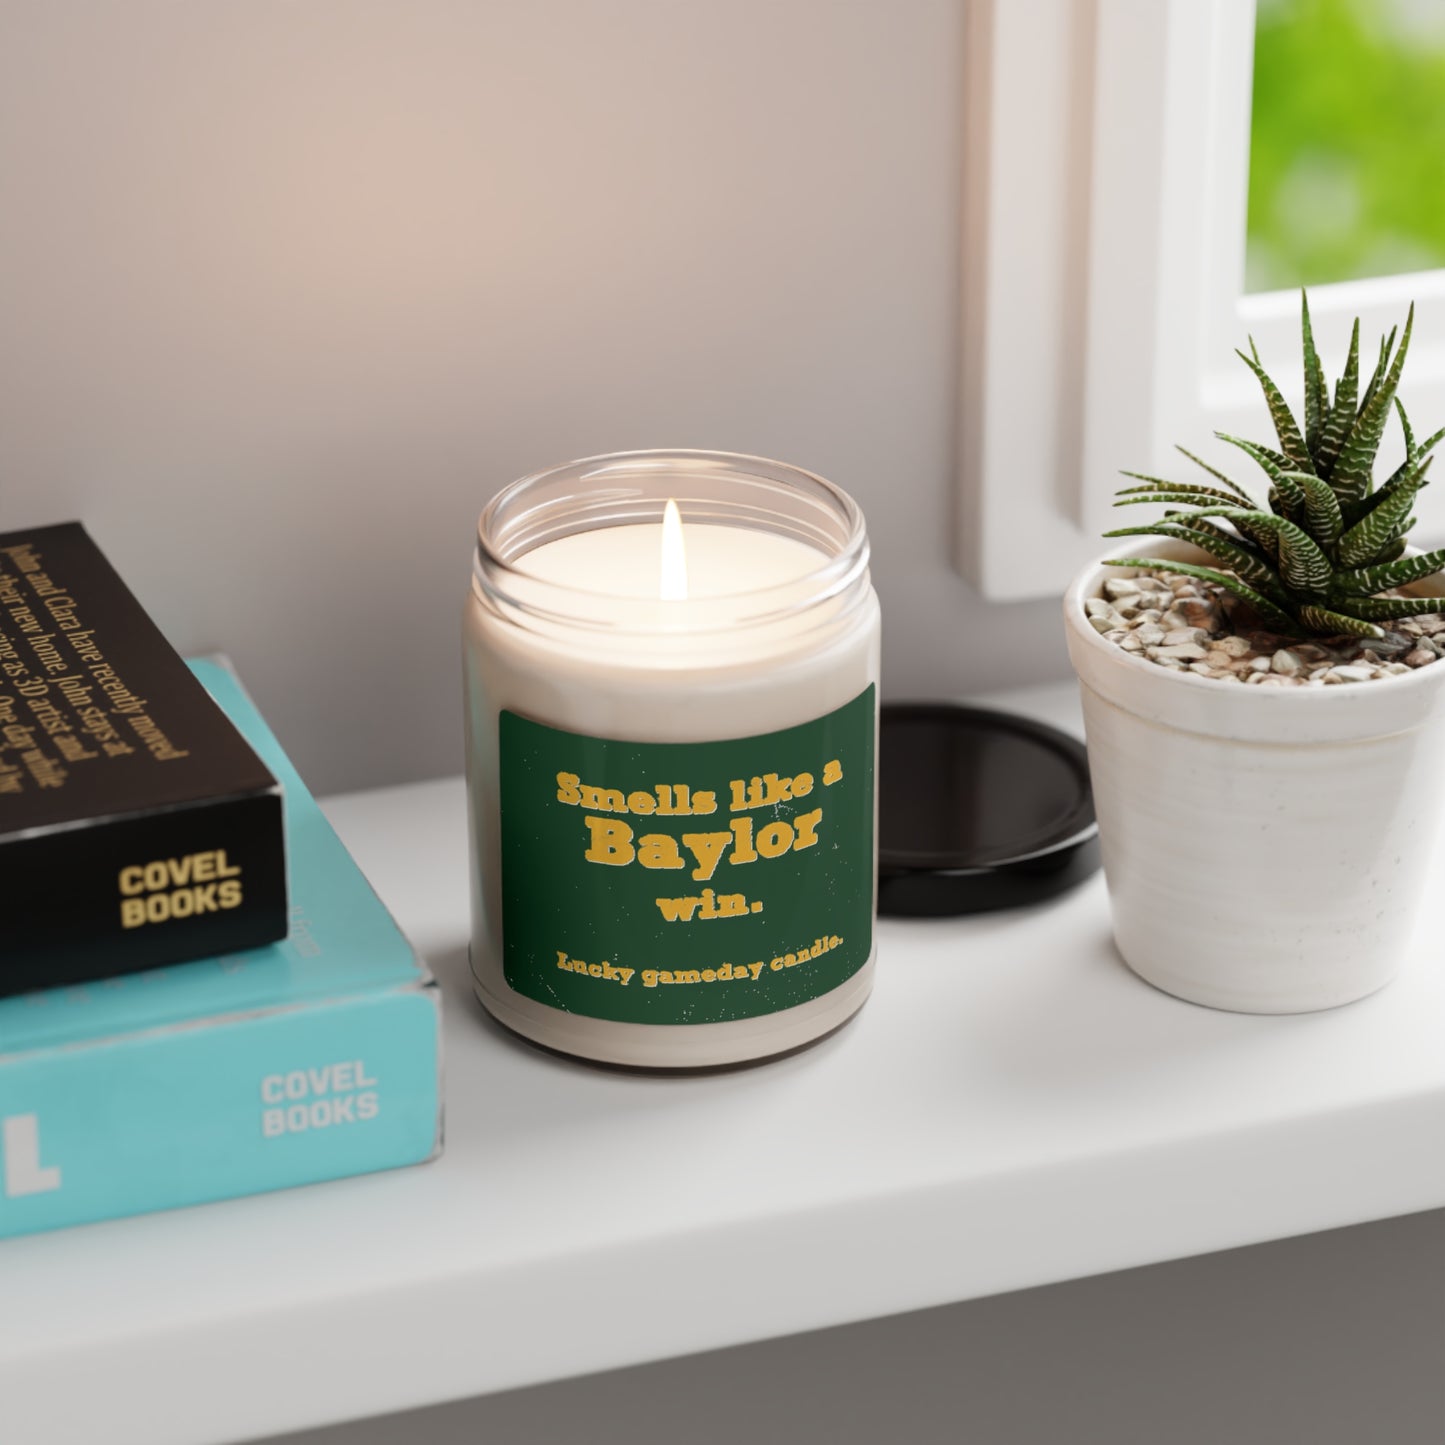 Baylor - "Smells Like a Baylor Win" Scented Candle